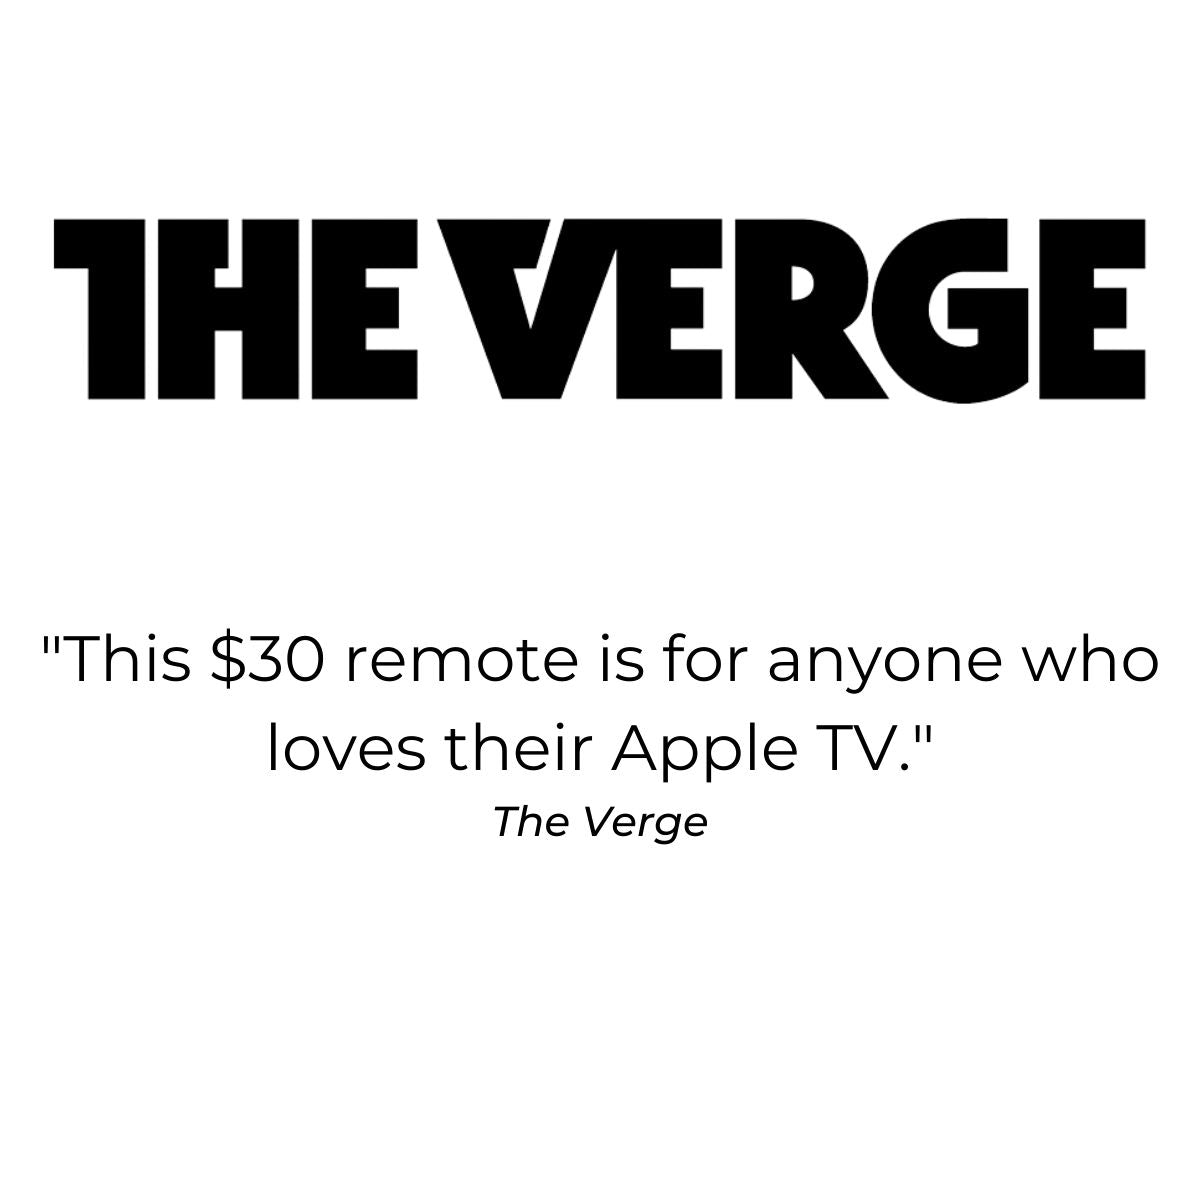 Testimonial Quote from The Verge.  "This $30 remote is for anyone who loves their Apple TV." The Vergge